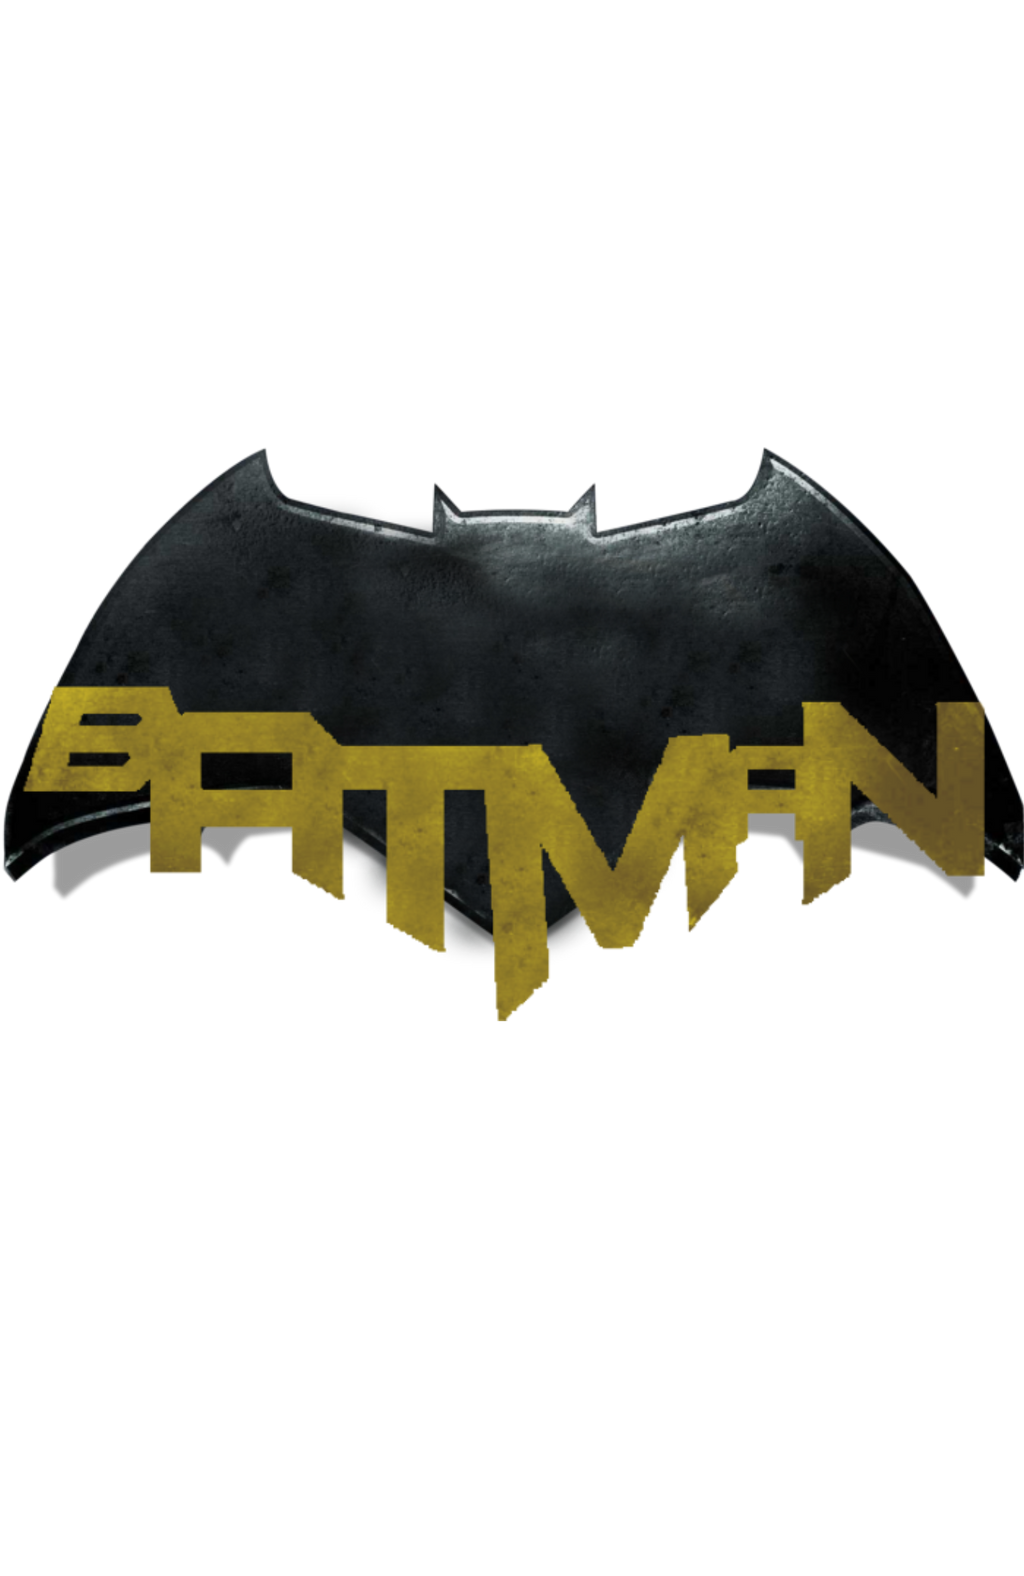 Batman comic style title card by Spider-maguire on DeviantArt